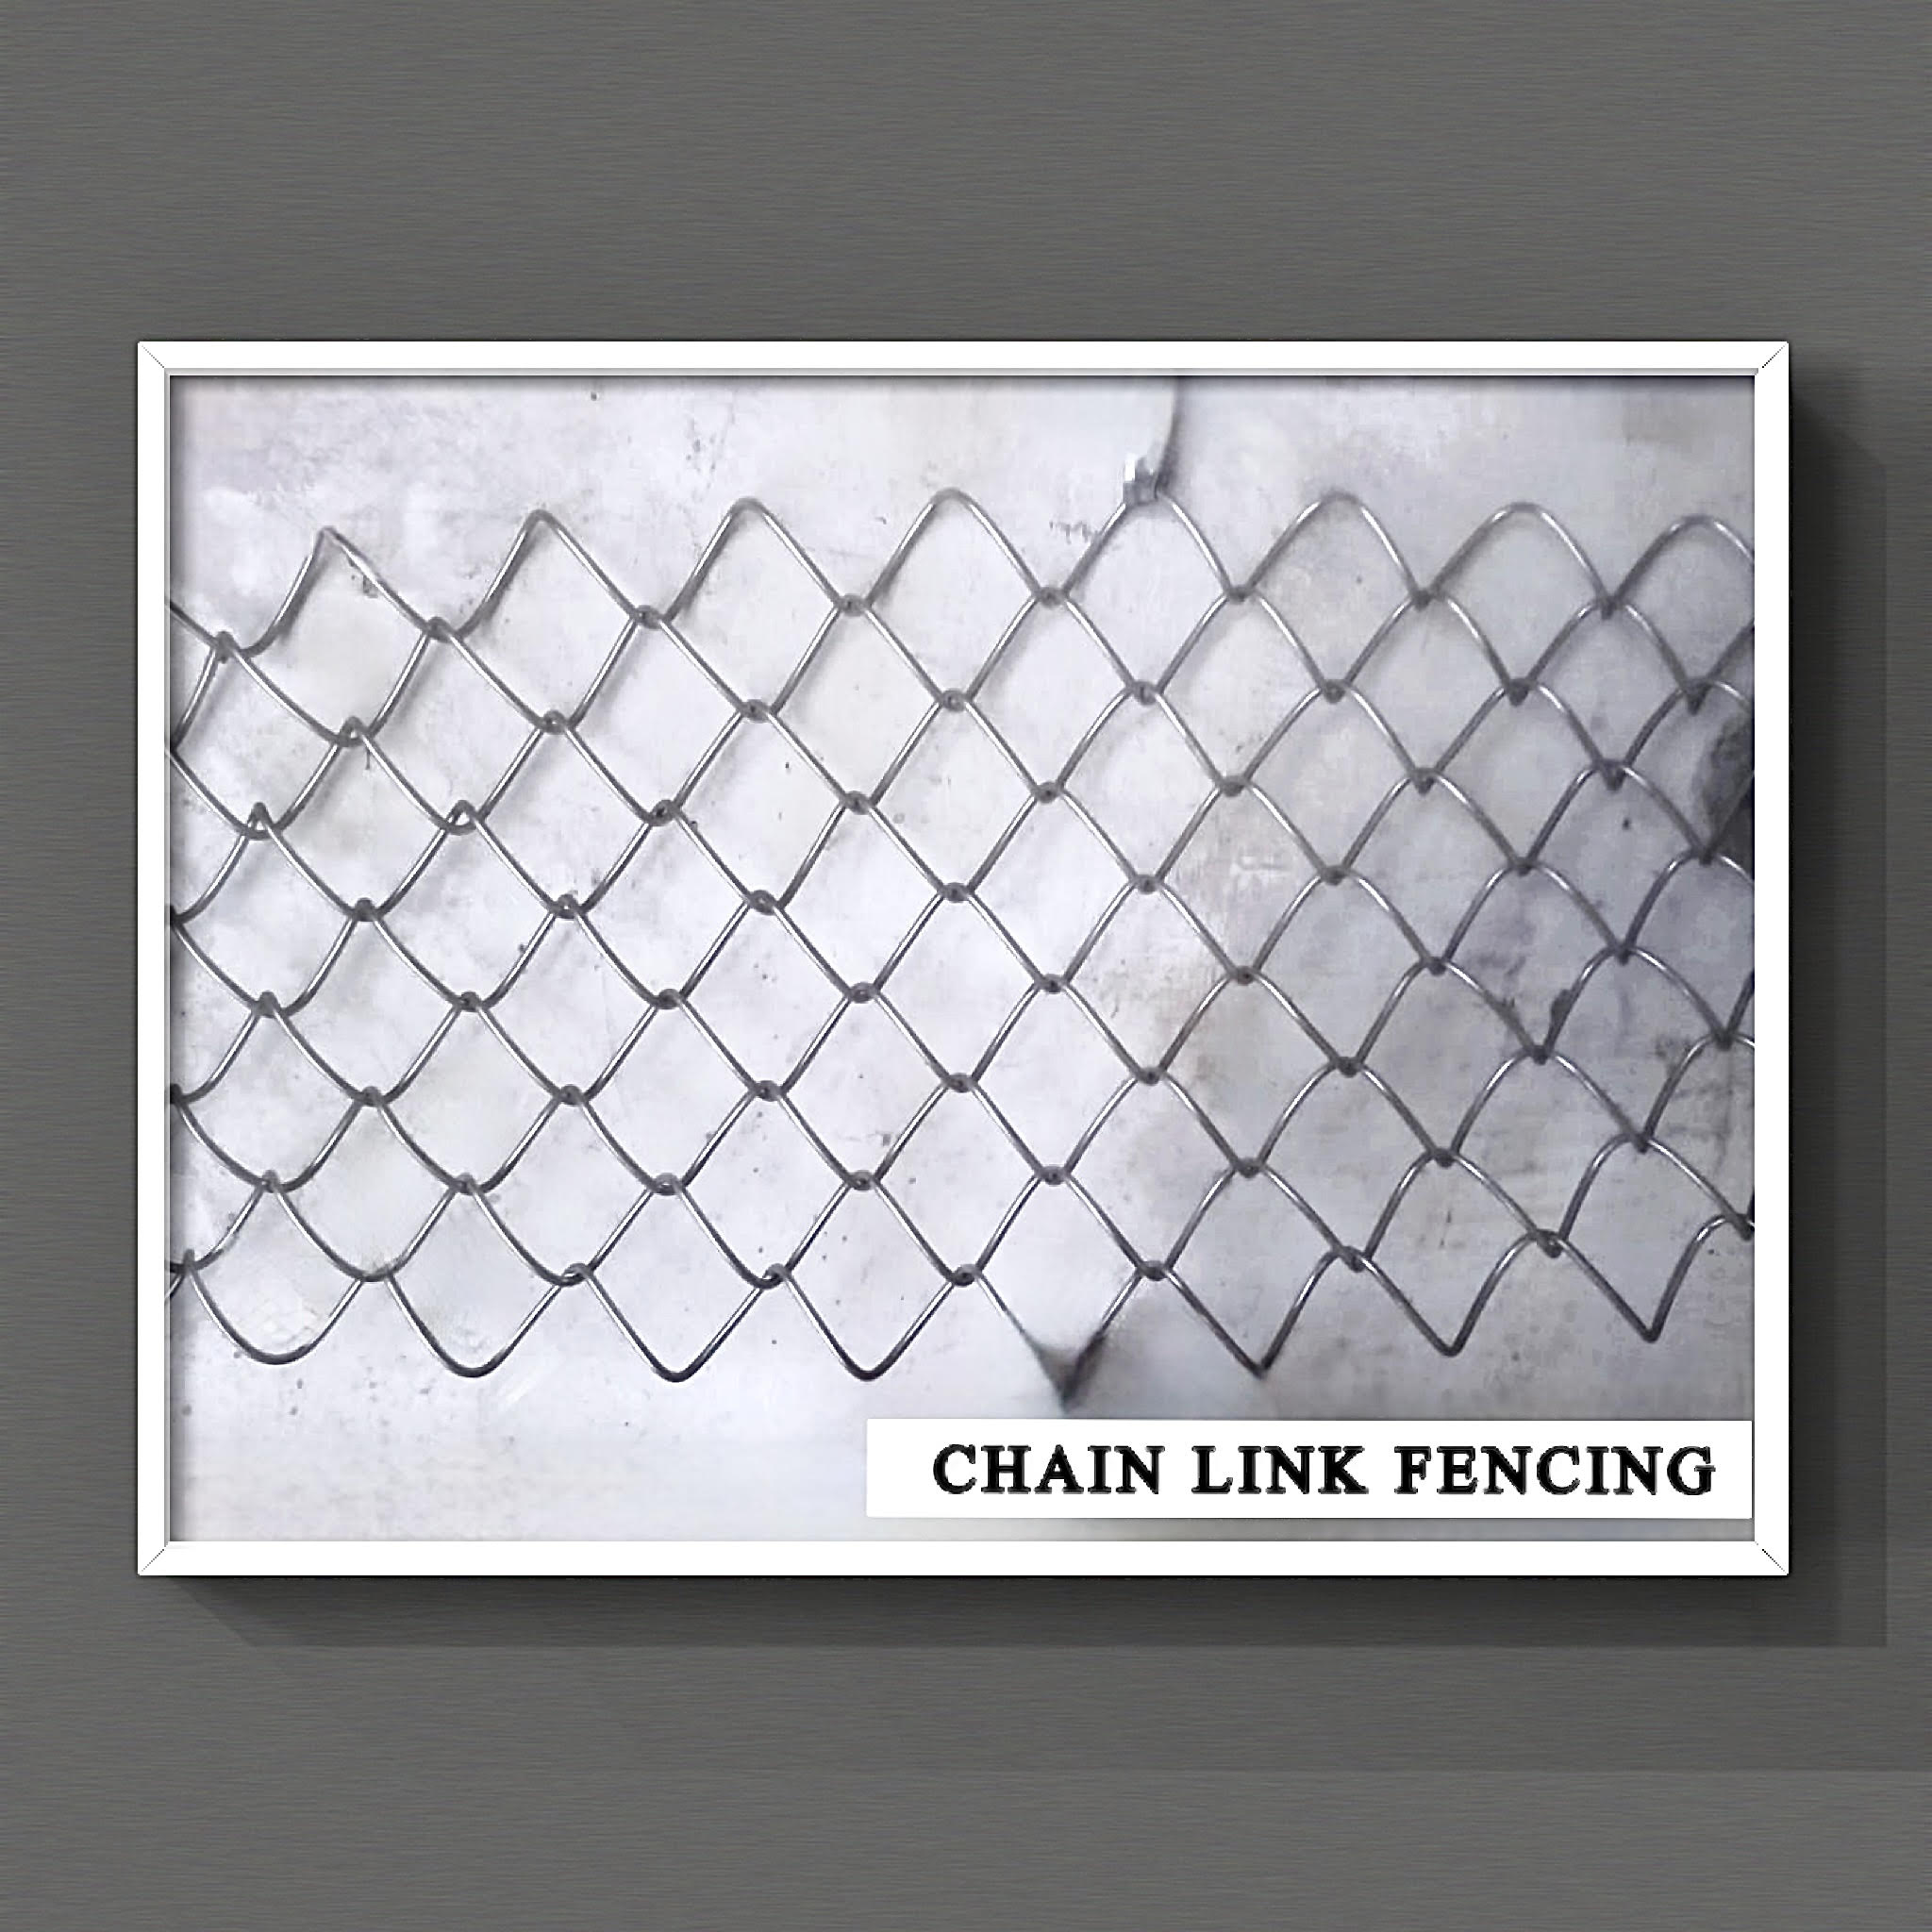 961039_CHAIN LINK PRODUCT DEMO AM INDUSTRIES.jpg